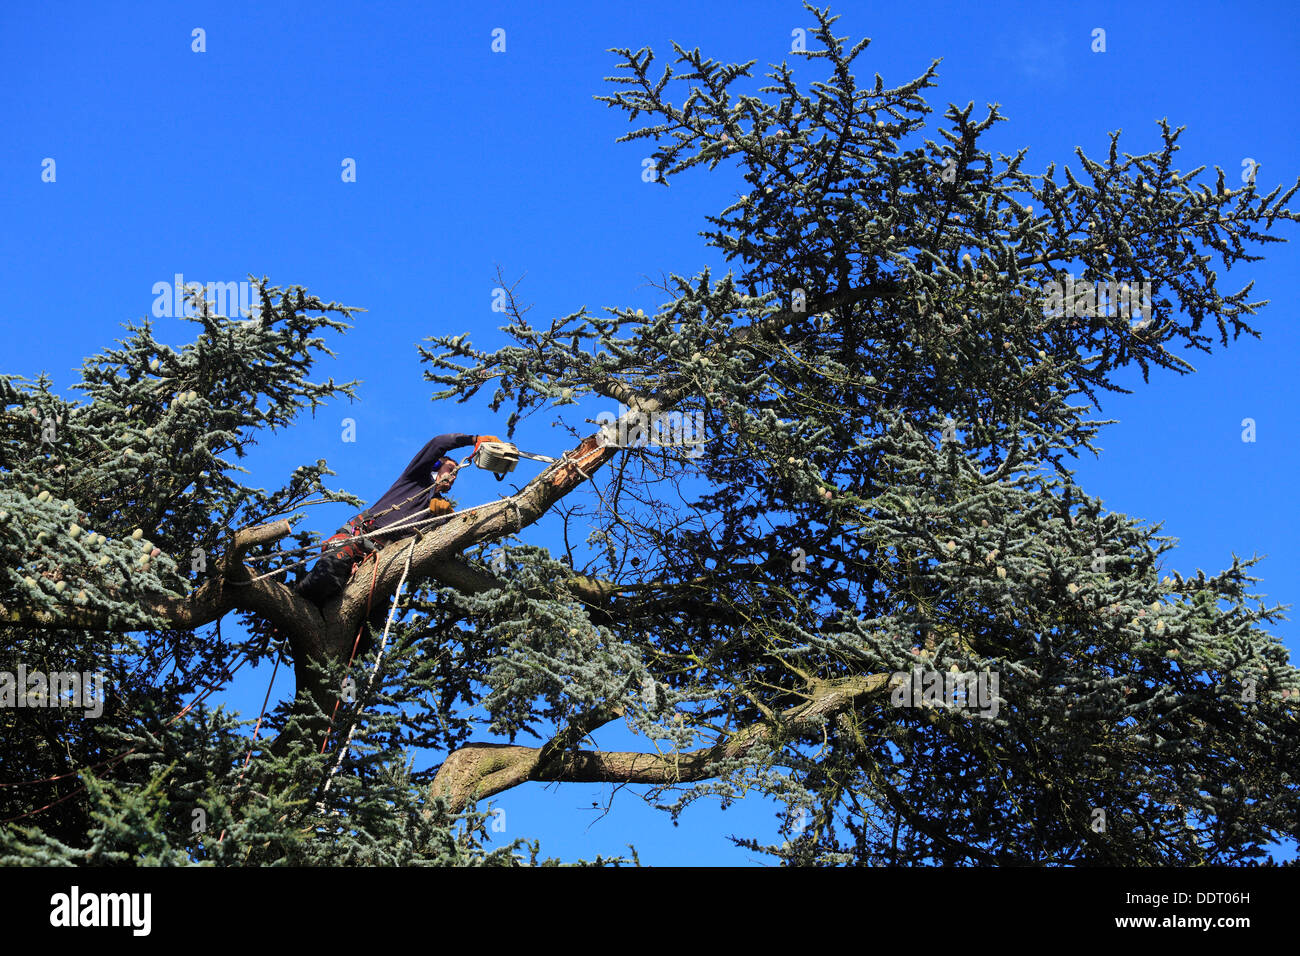 Trimming large Cedar Tree with broken branches Stock Photo